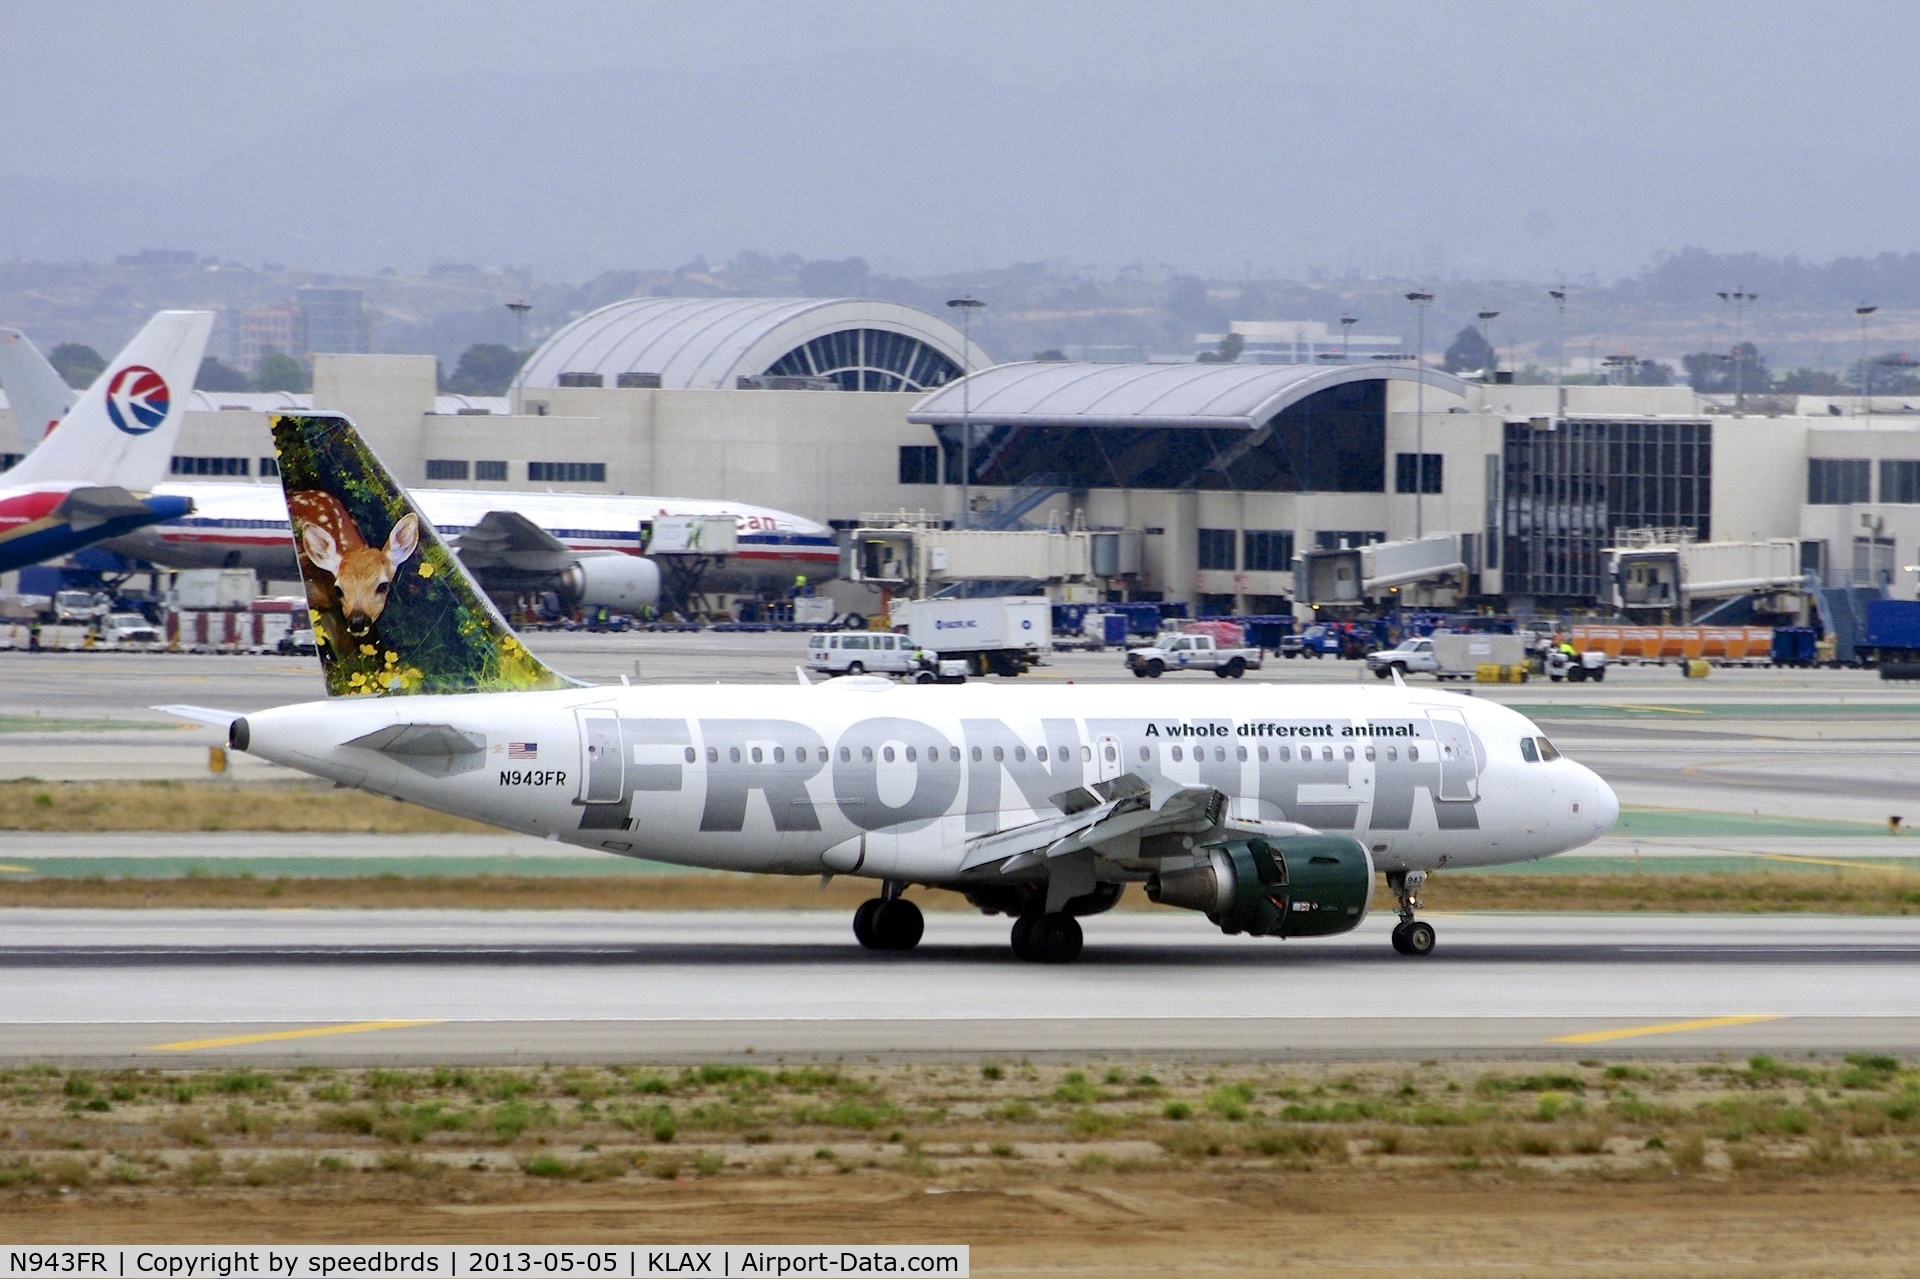 N943FR, 2005 Airbus A319-112 C/N 2518, Frontier Airlines A319